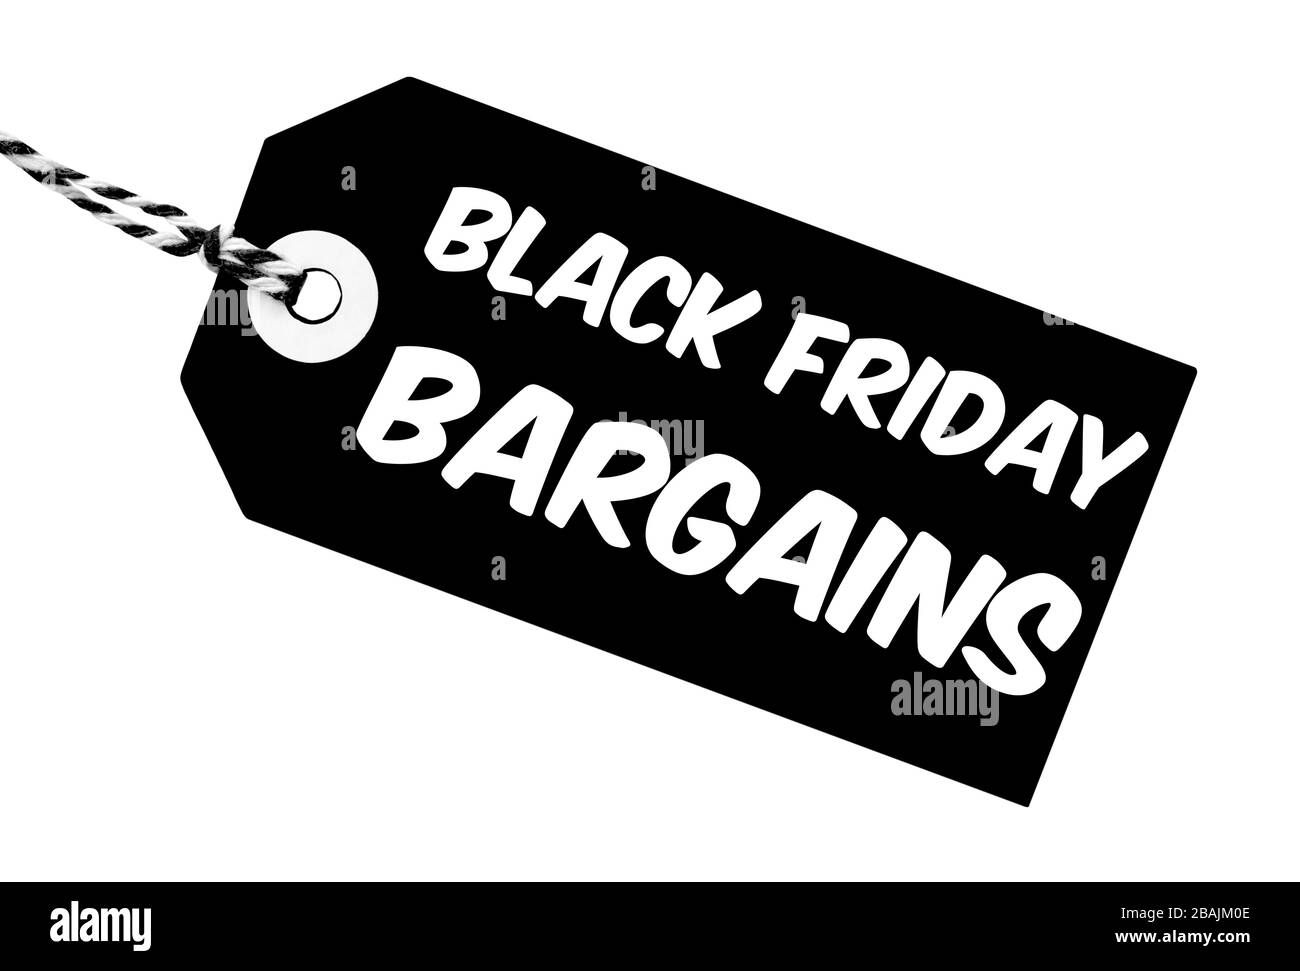 Black Friday Bargains label made from cardboard with string on an isolated white background Stock Photo